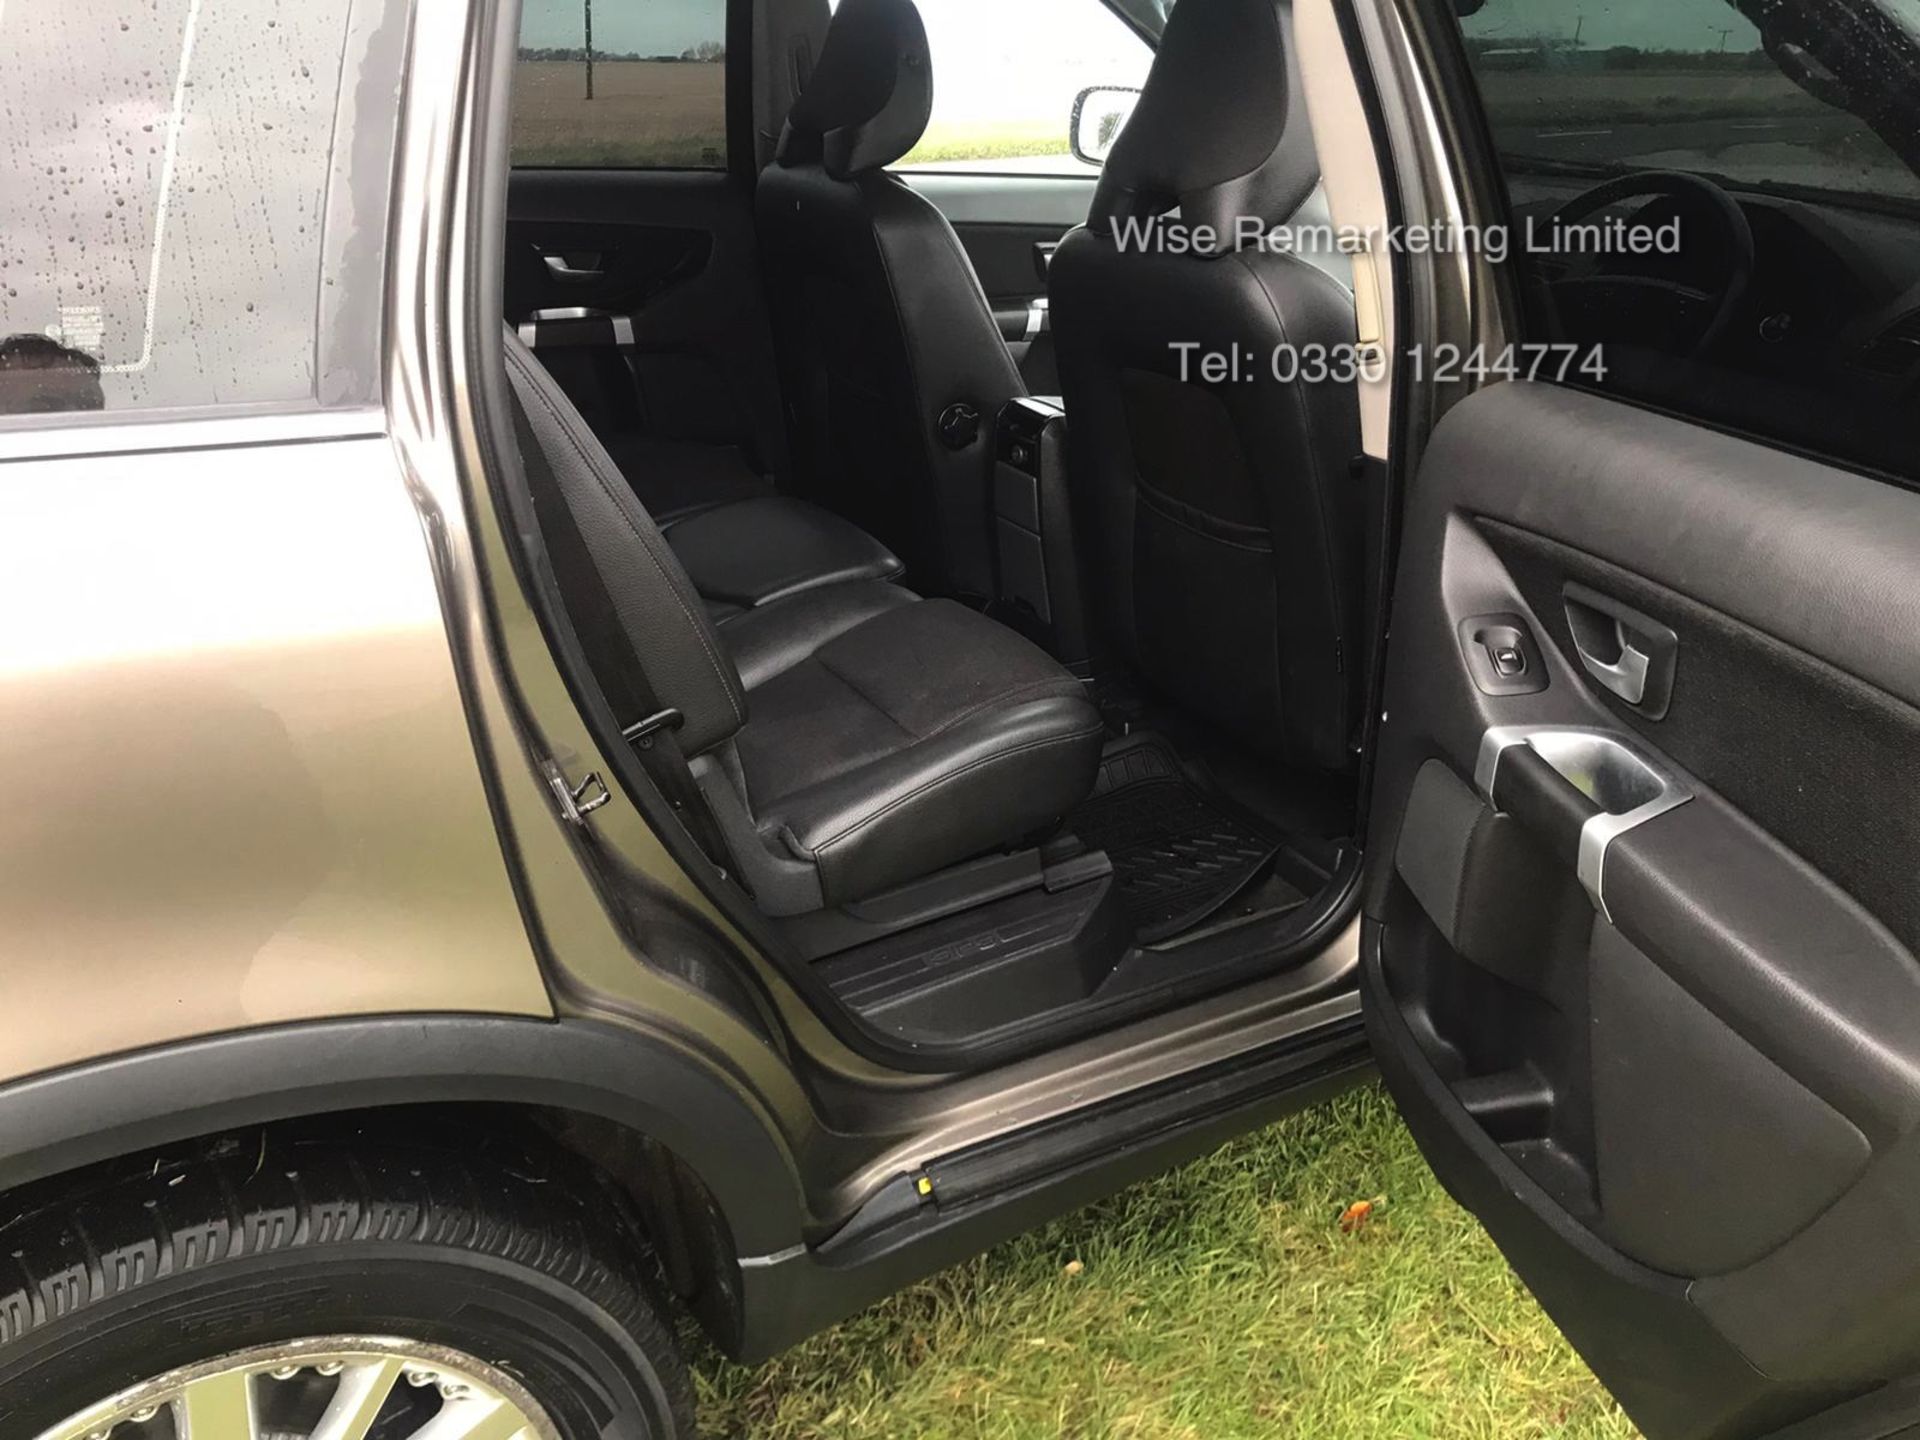 (Reserve Met) Volvo XC90 2.4 D5 S - 2008 Model - Service History - 4x4 - 7 Seater - Image 10 of 23